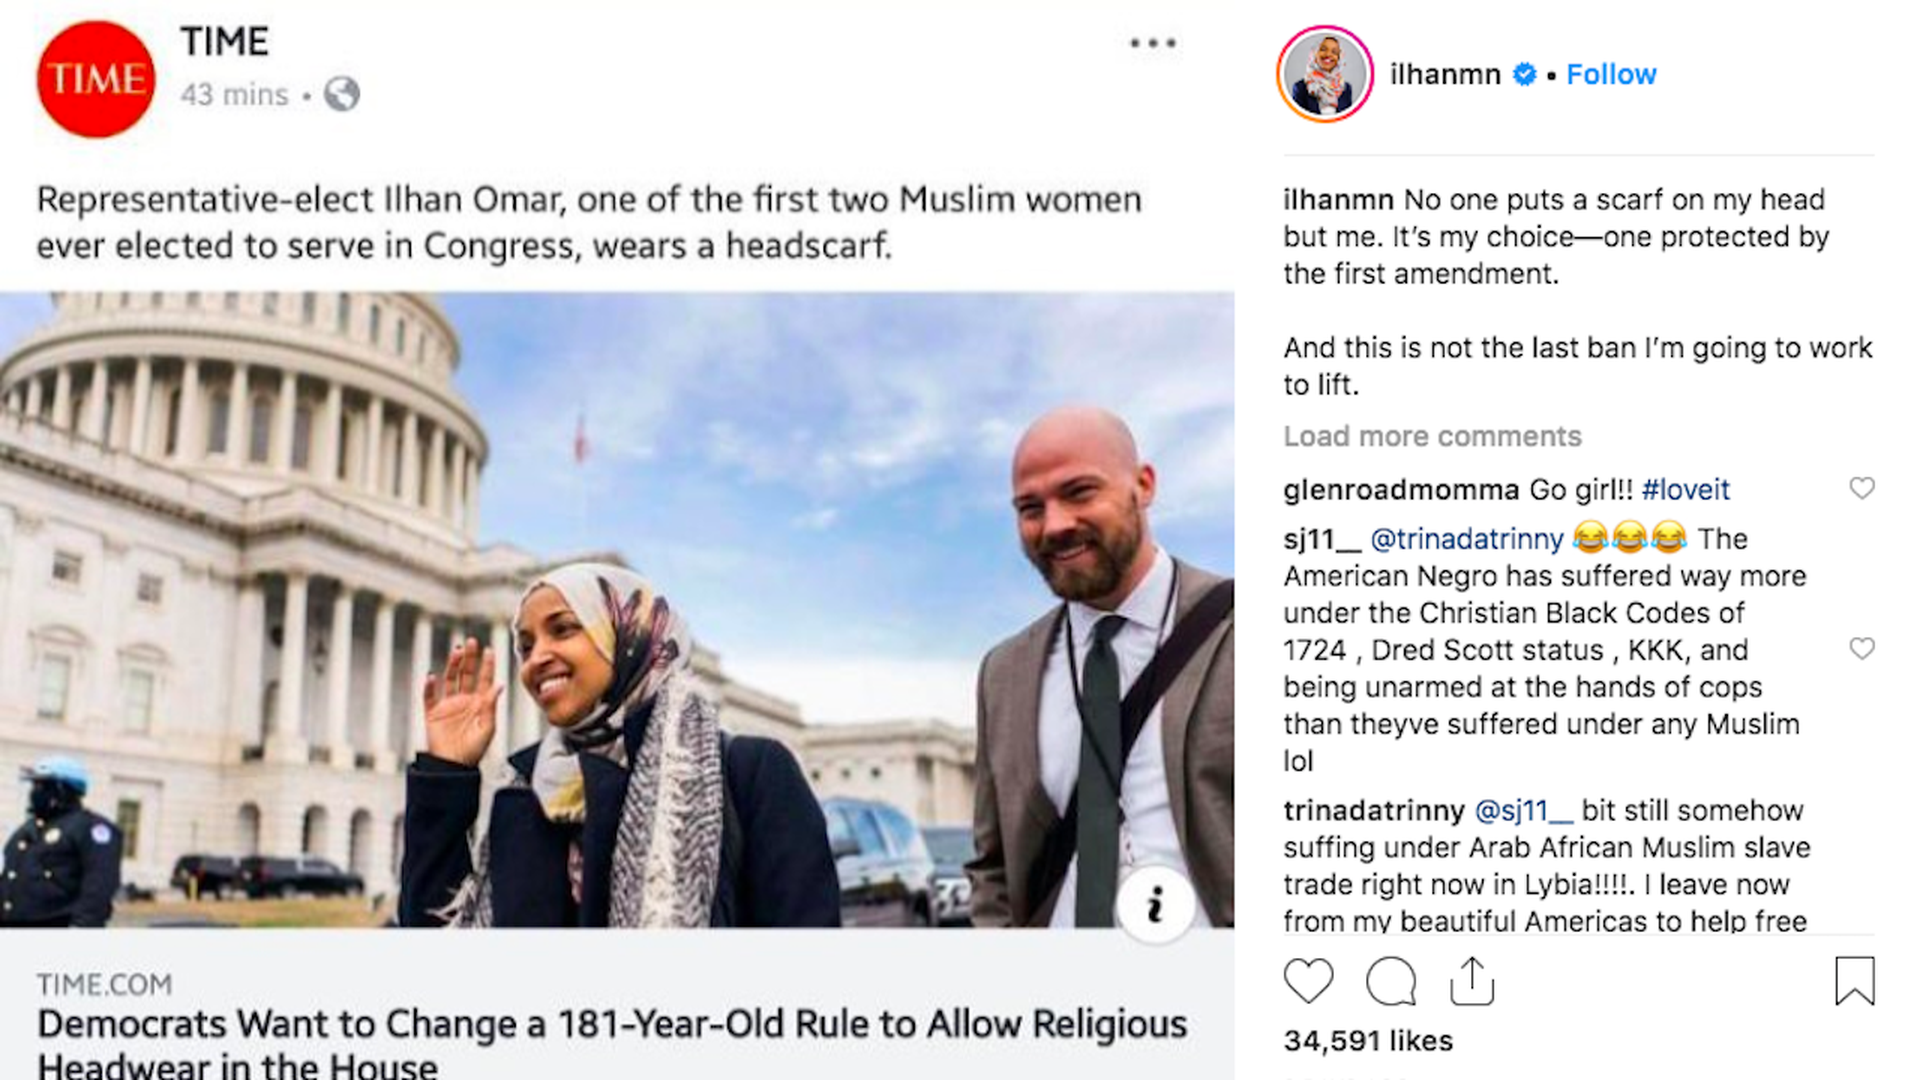 Screenshot from Ilhan Omar's Instagram profile